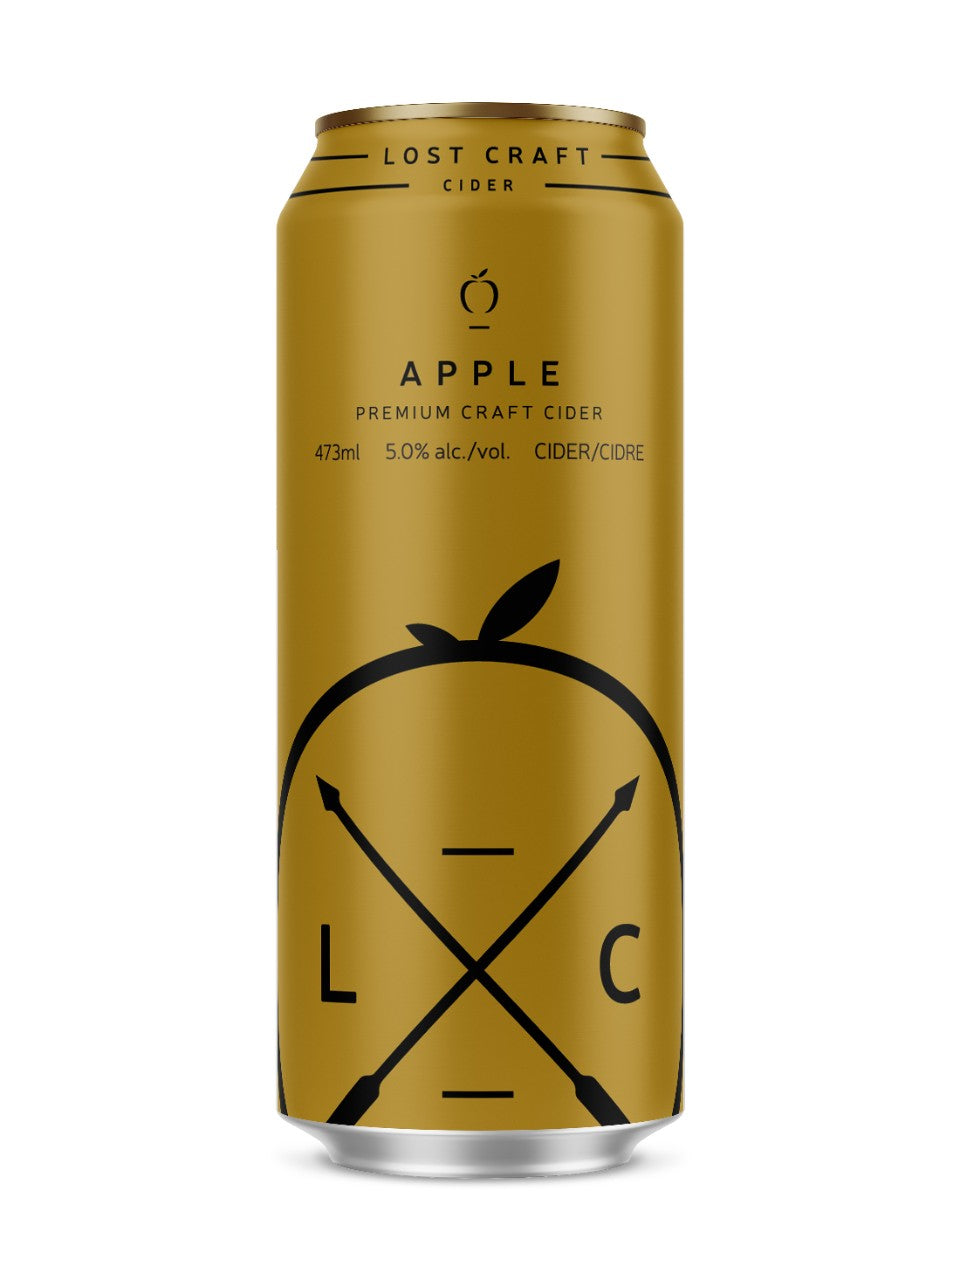 Lost Craft Apple Cider 473 mL can